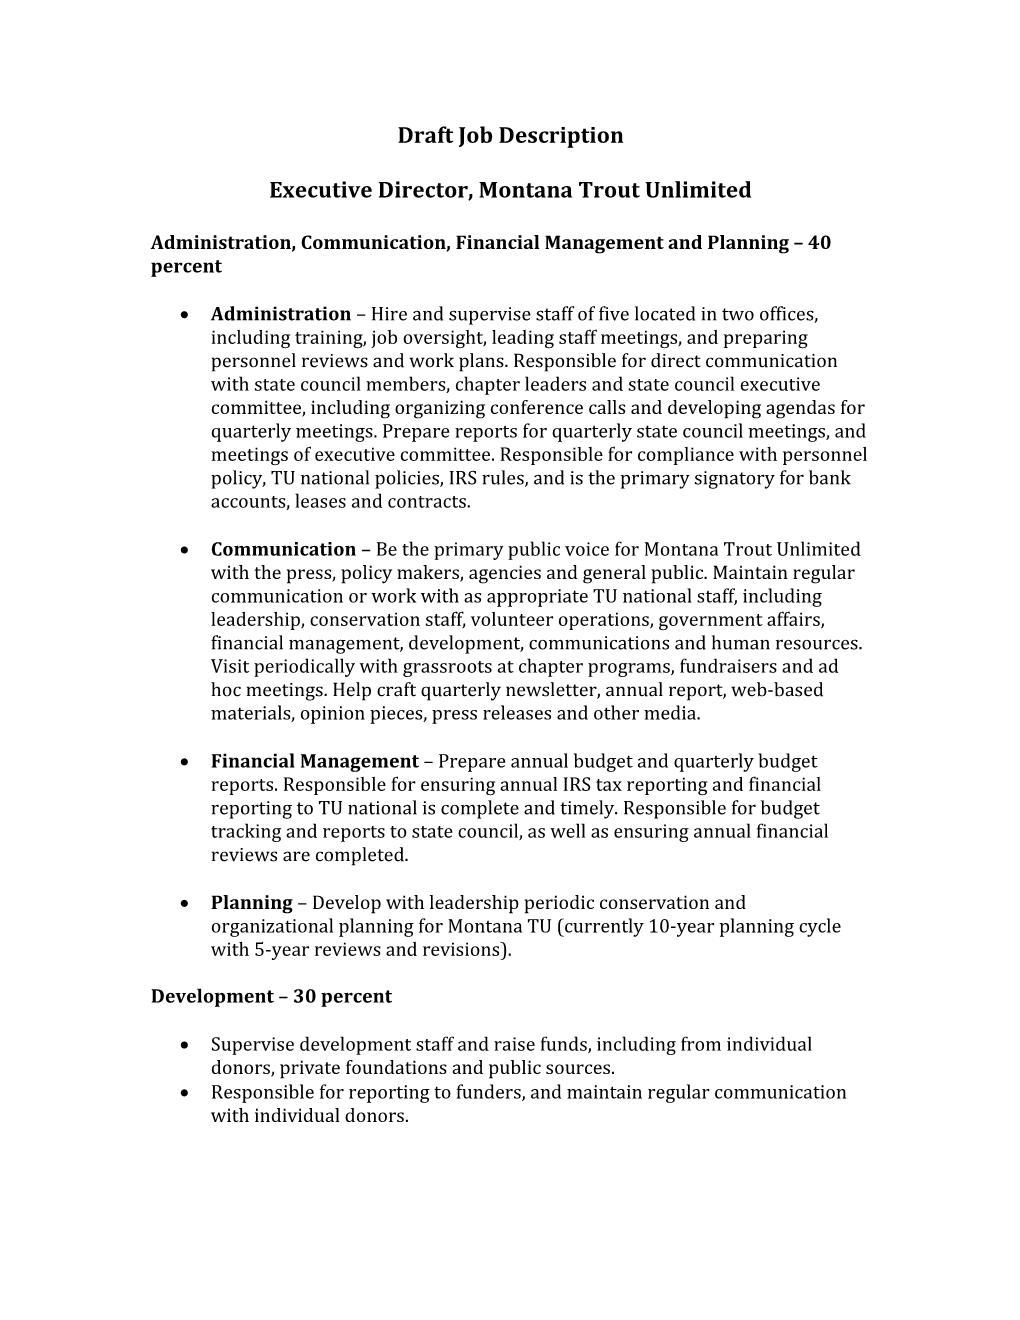 Executive Director, Montana Trout Unlimited